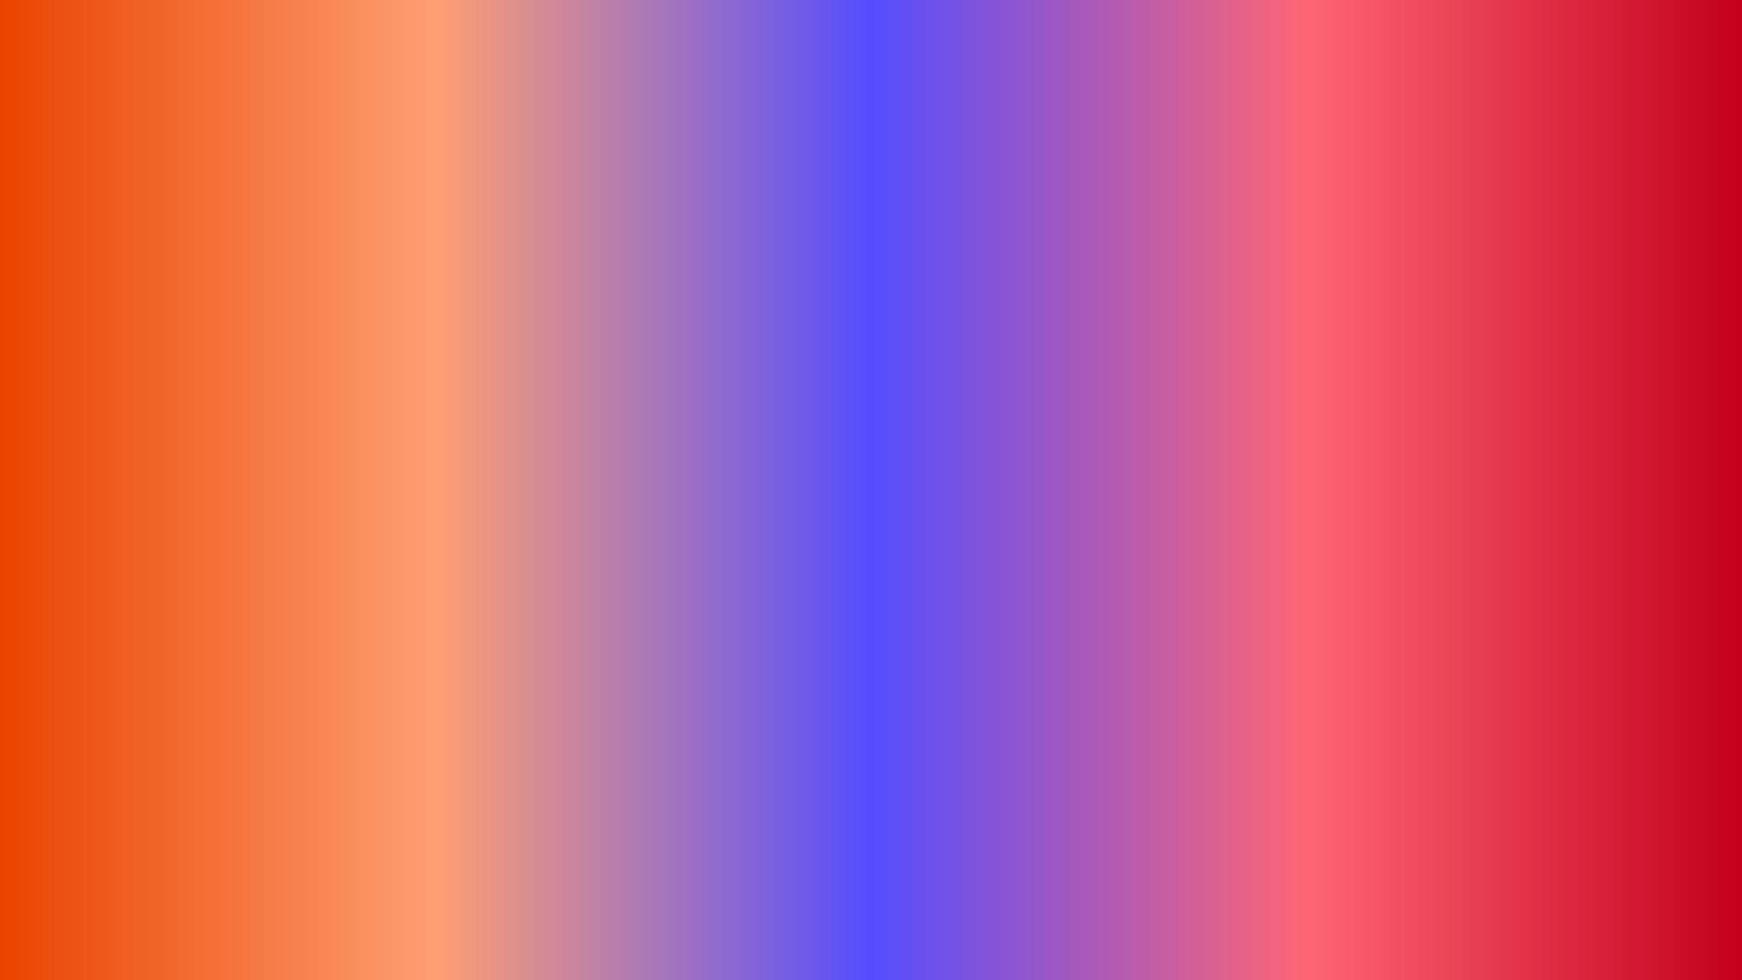 Abstract blue, orange and red gradient background perfect for promotion, presentation, wallpaper, design etc vector